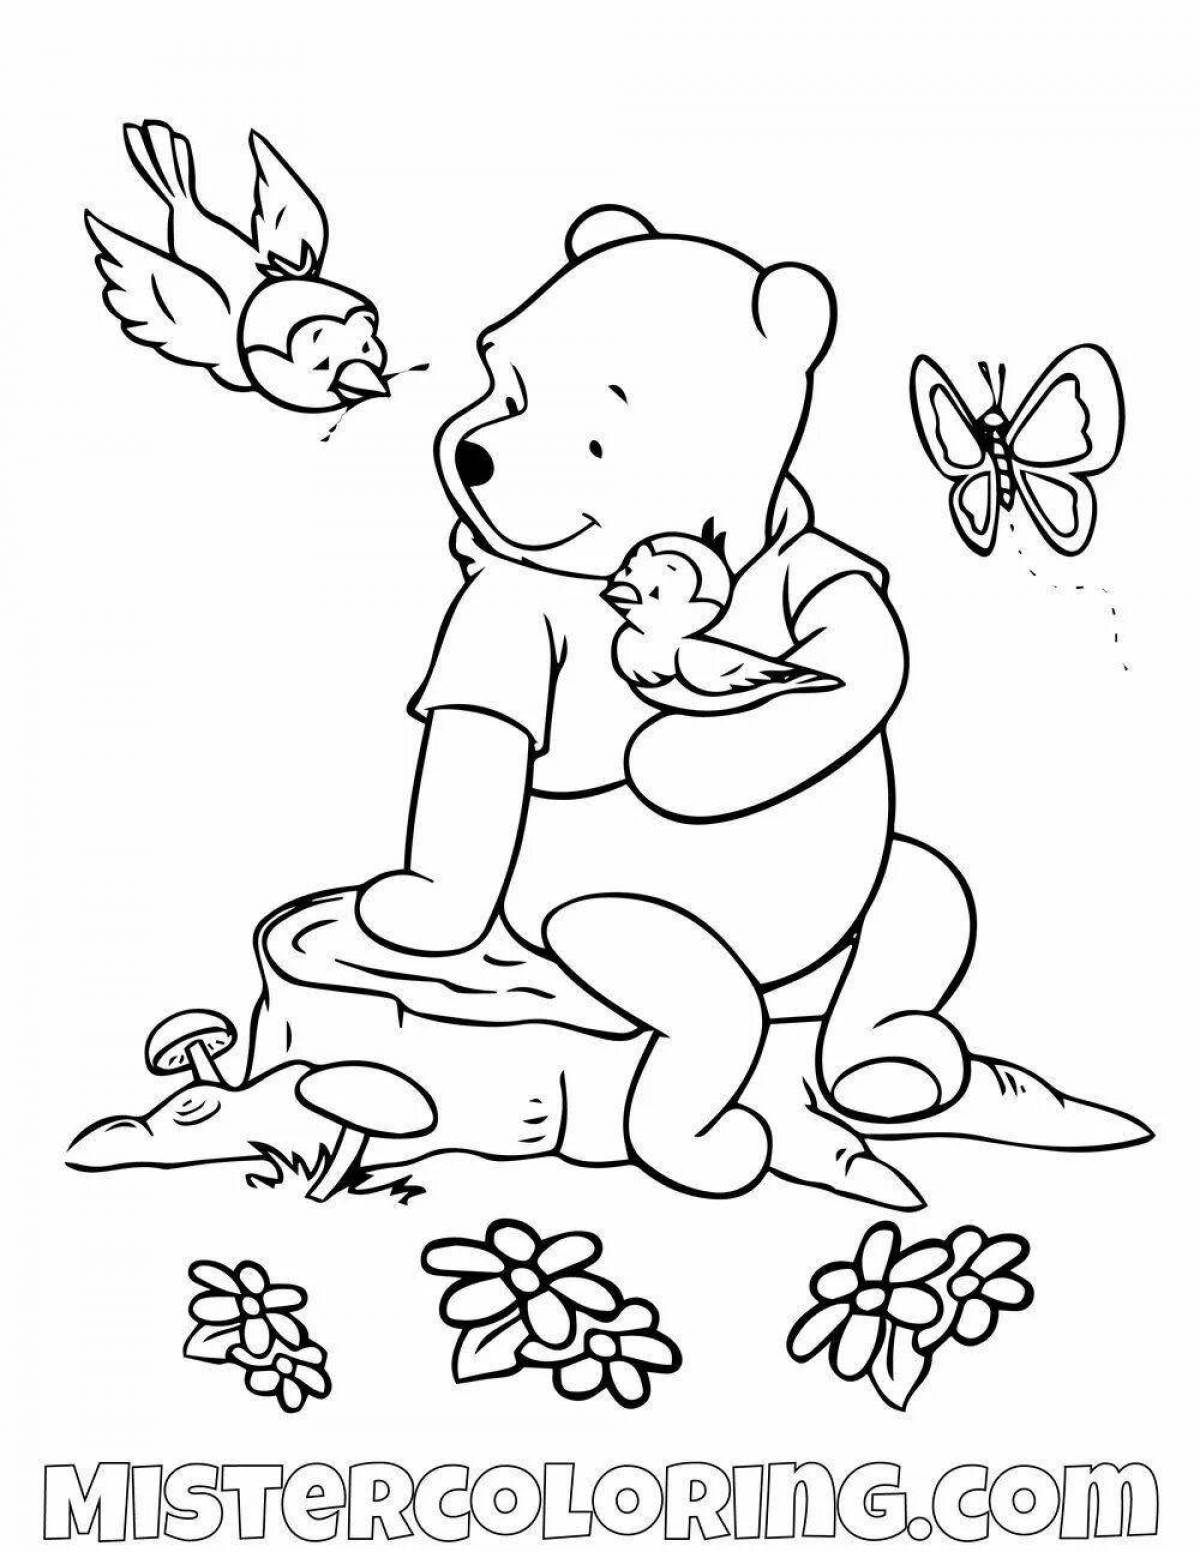 Coloring page smiling winnie the pooh and his friends